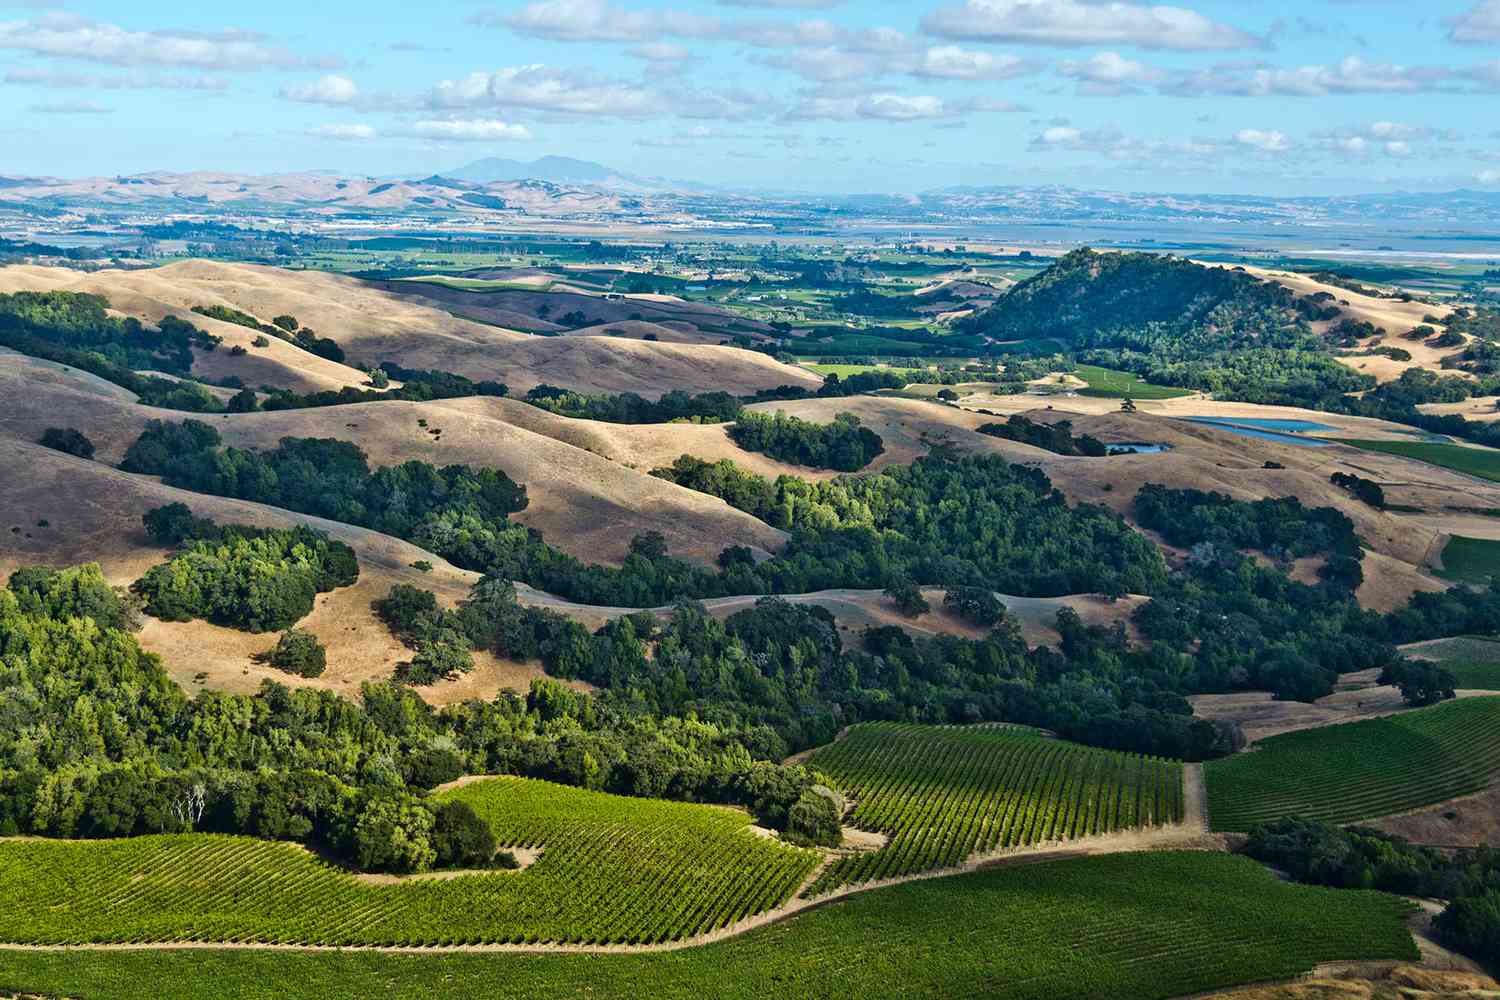 Weekend Getaway In Sonoma: Itinerary Of Things To Do In Sonoma County, CA